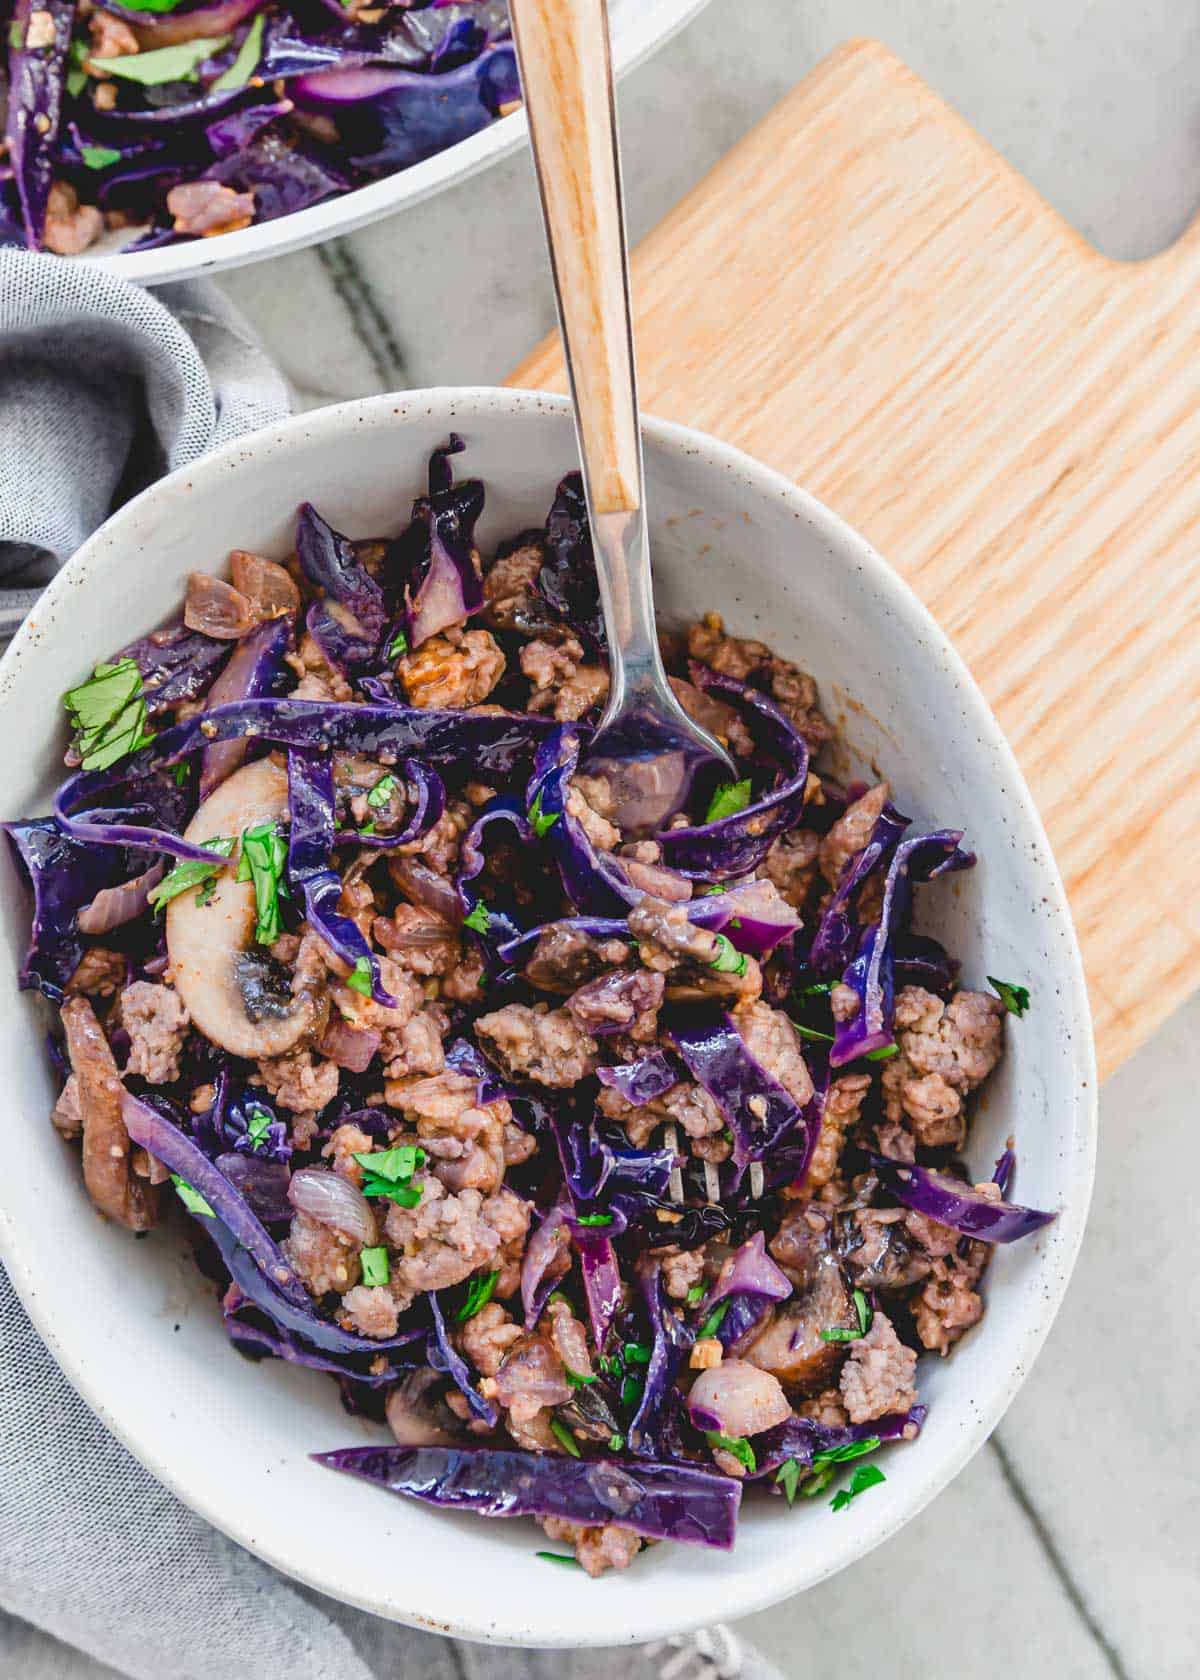 Ground pork and cabbage stir fry recipe with mushrooms in a bowl with a fork.